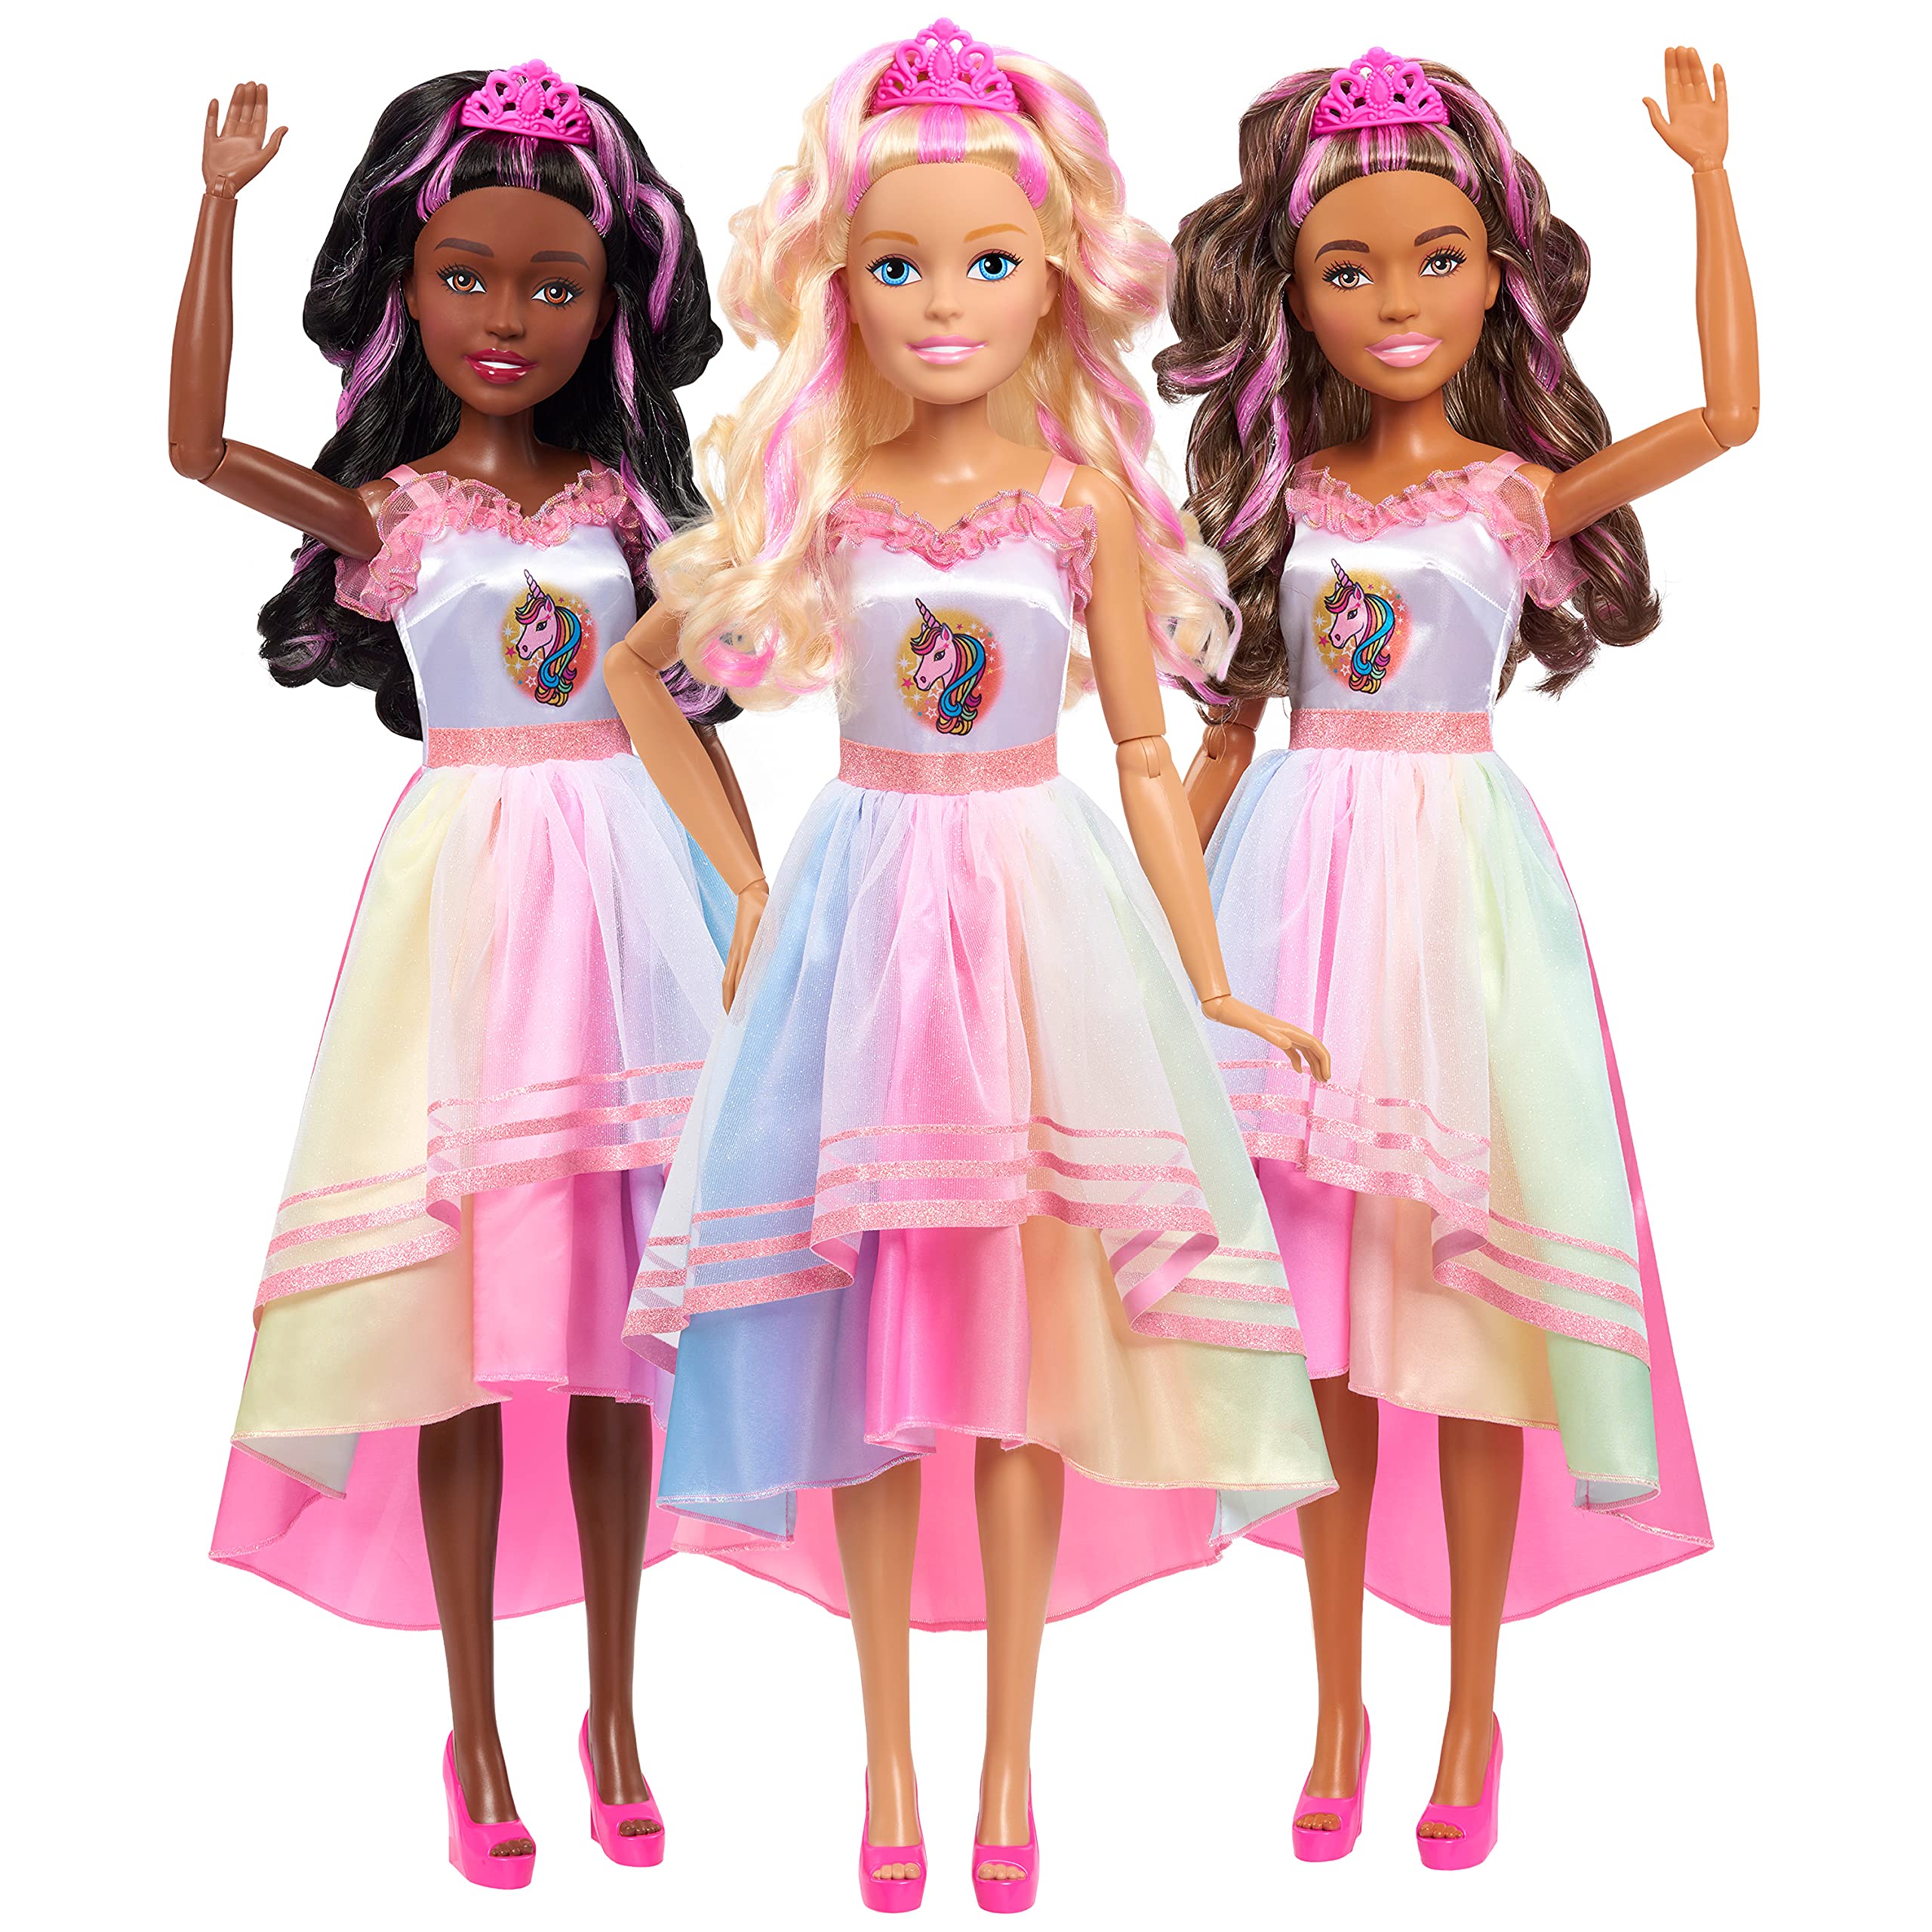 Just Play Barbie 28-inch Best Fashion Friend Unicorn Party Doll, Blonde Hair, Kids Toys for Ages 3 Up, Amazon Exclusive